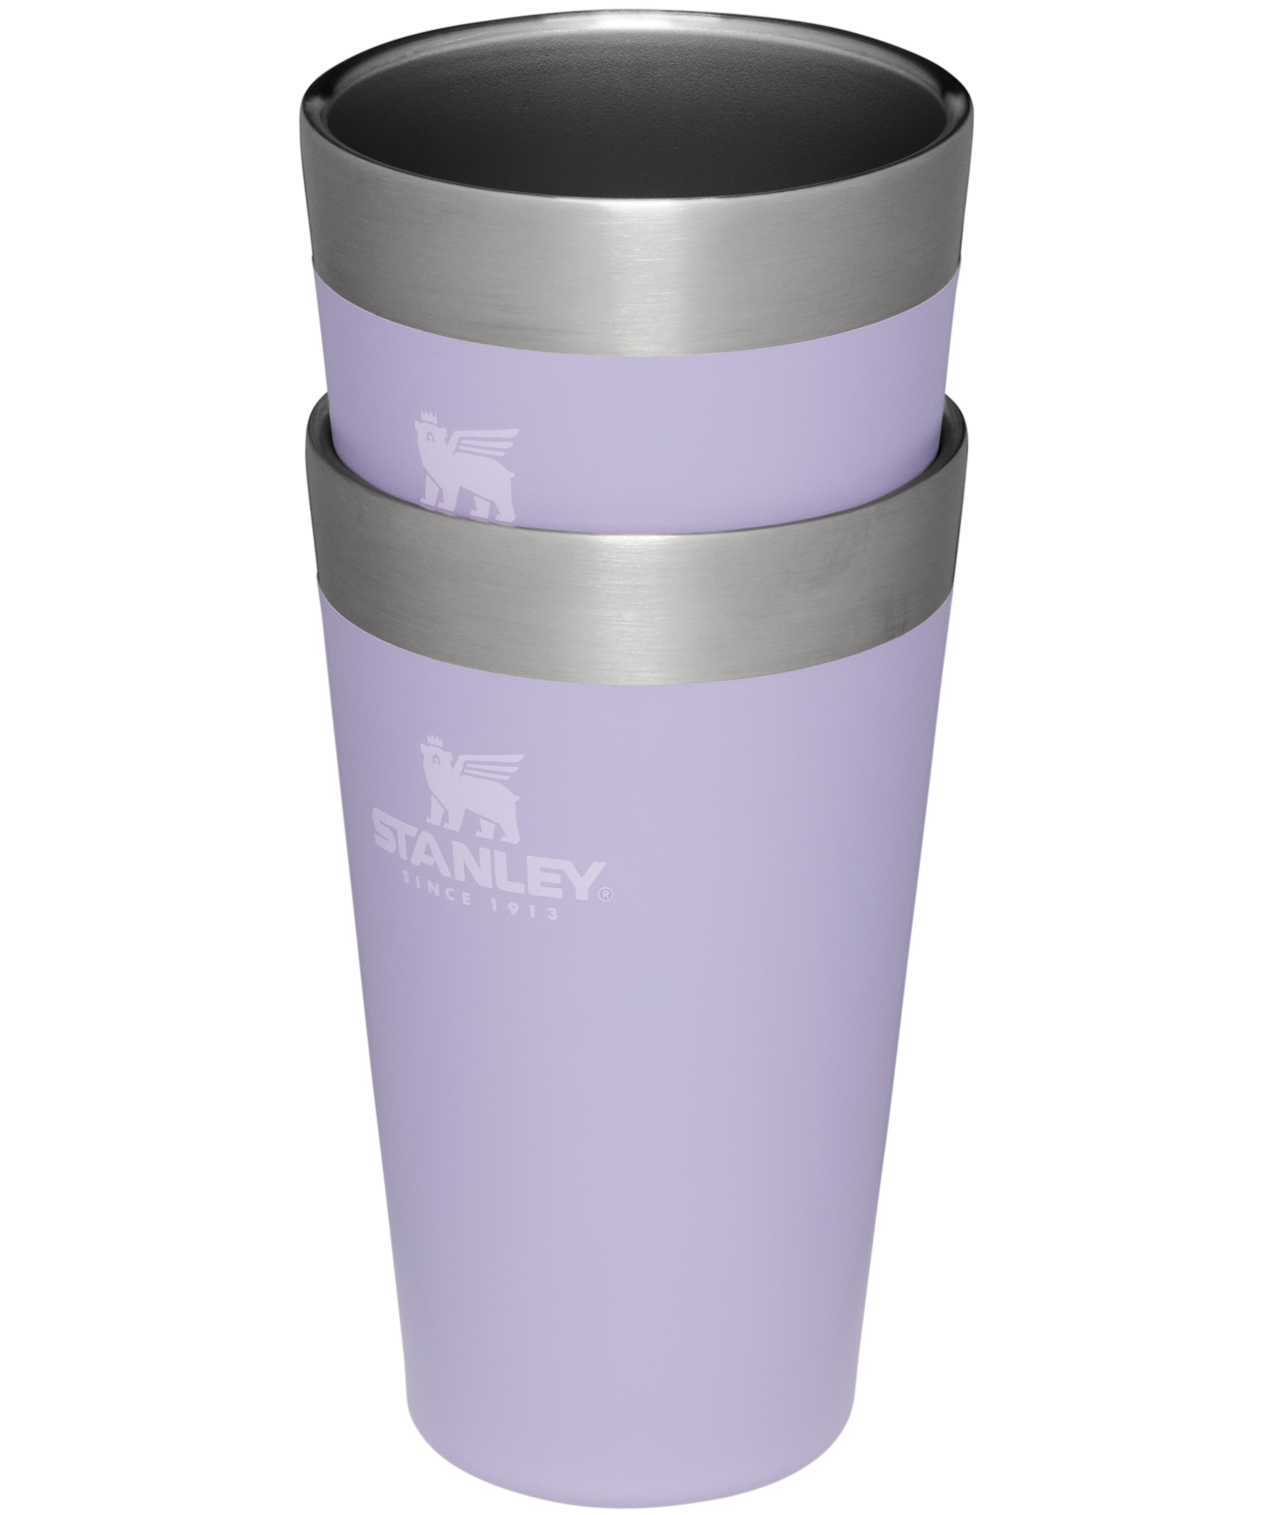 Stanley Insulated Pint Cup Test And Review 